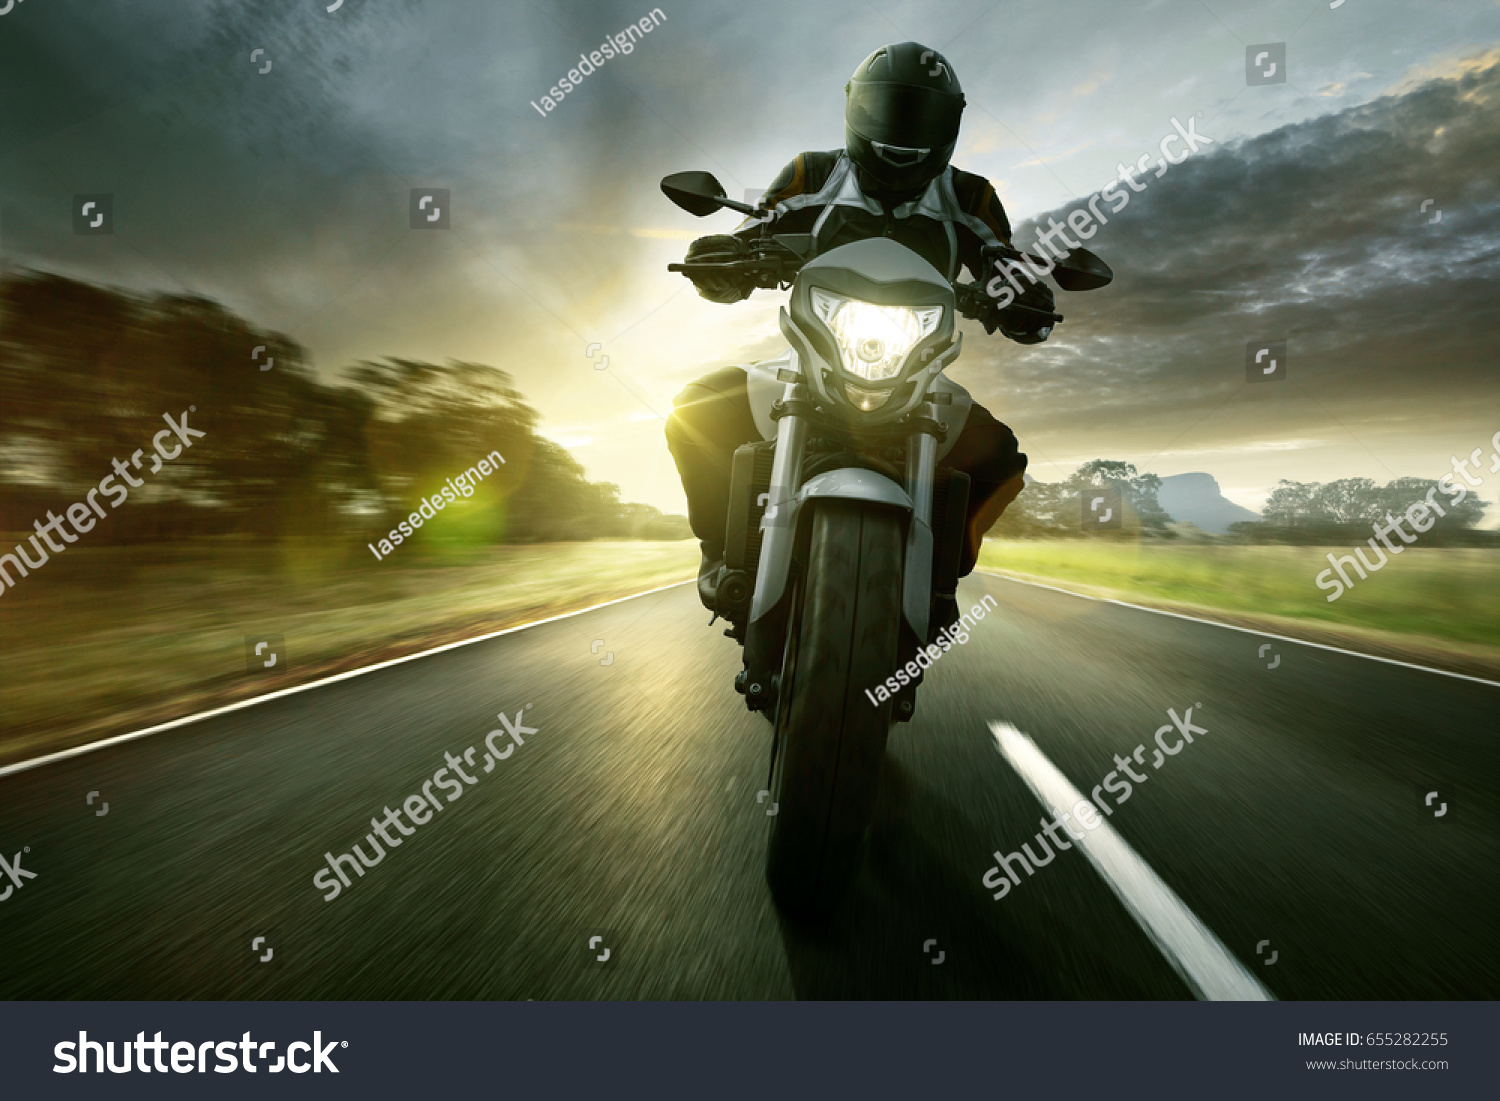 Motorbike on a country road #655282255